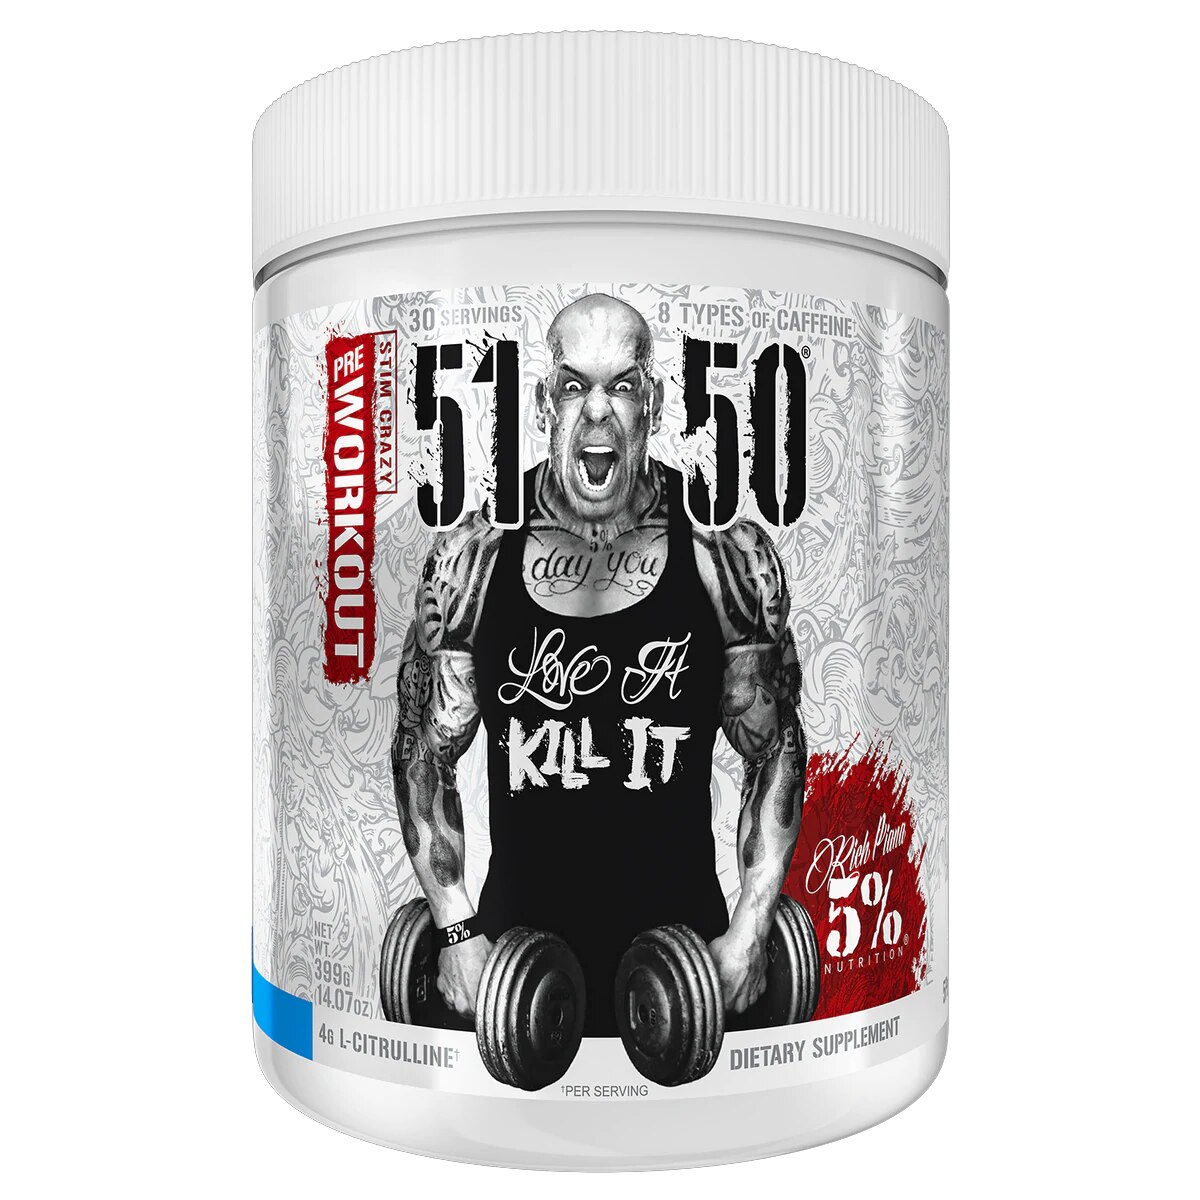 5-nutrition 5150 blue ice